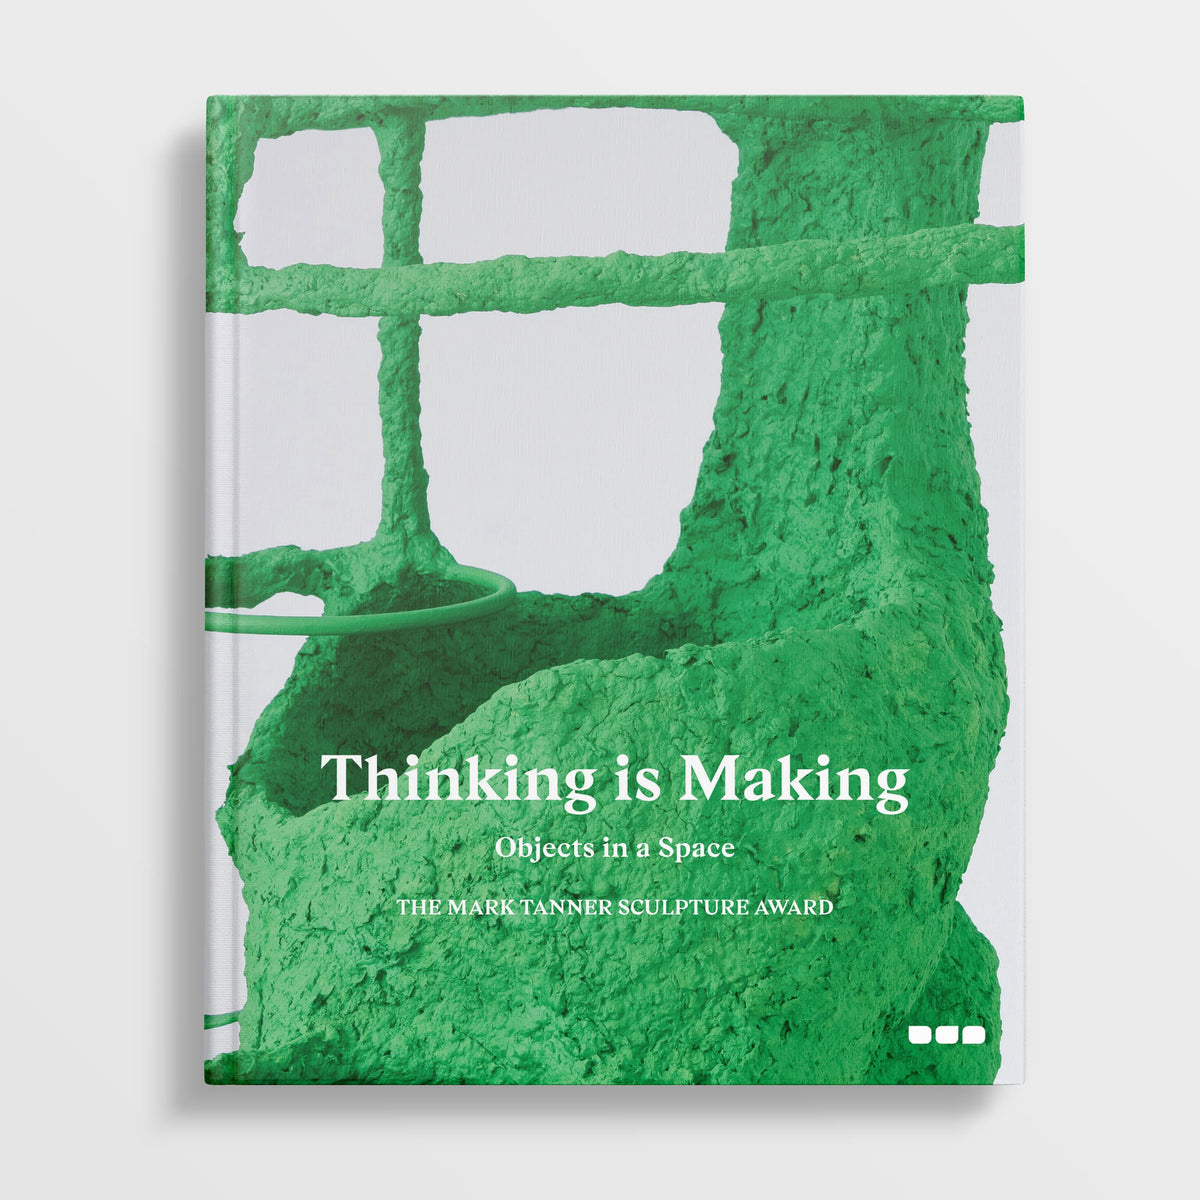 Thinking is Making: Objects in Space The Mark Tanner Sculpture Award